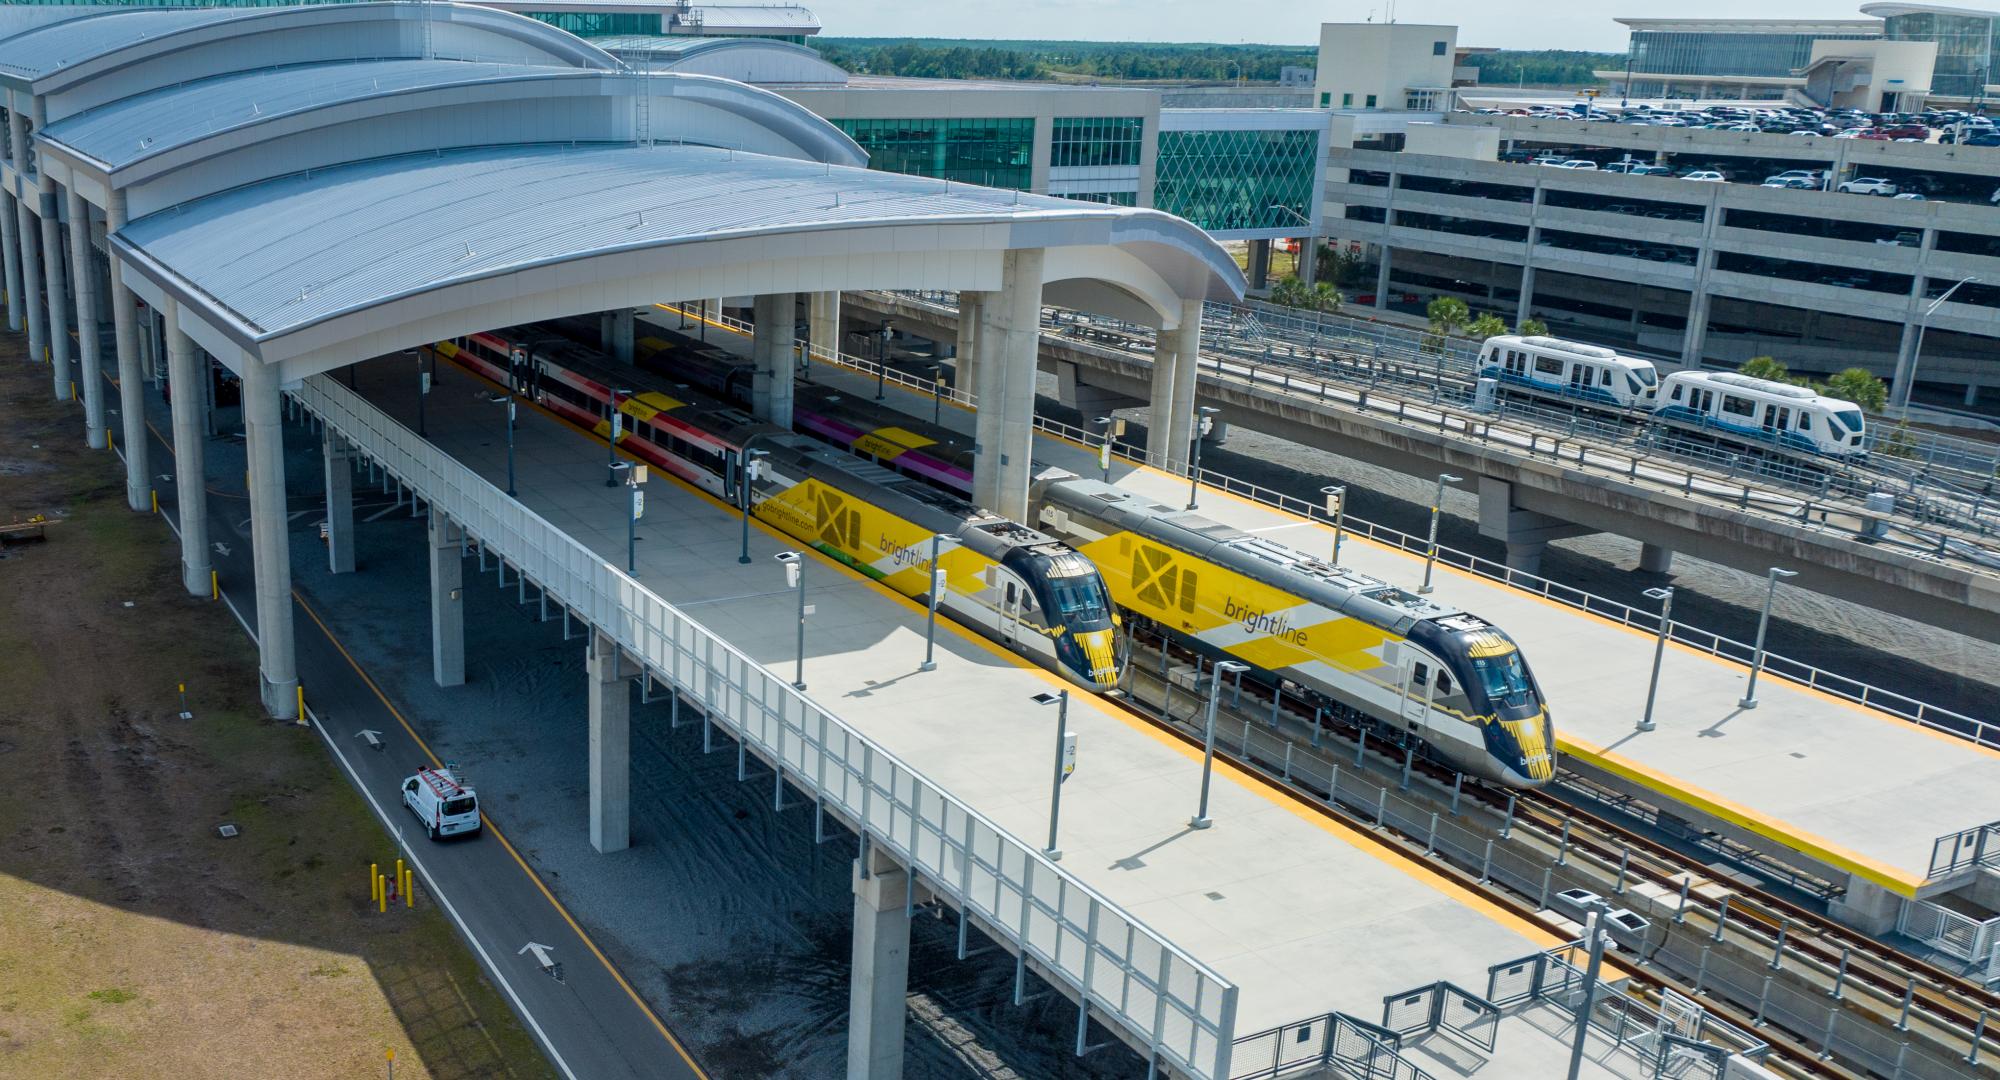 First private passenger service in the U.S in a century launches in Florida